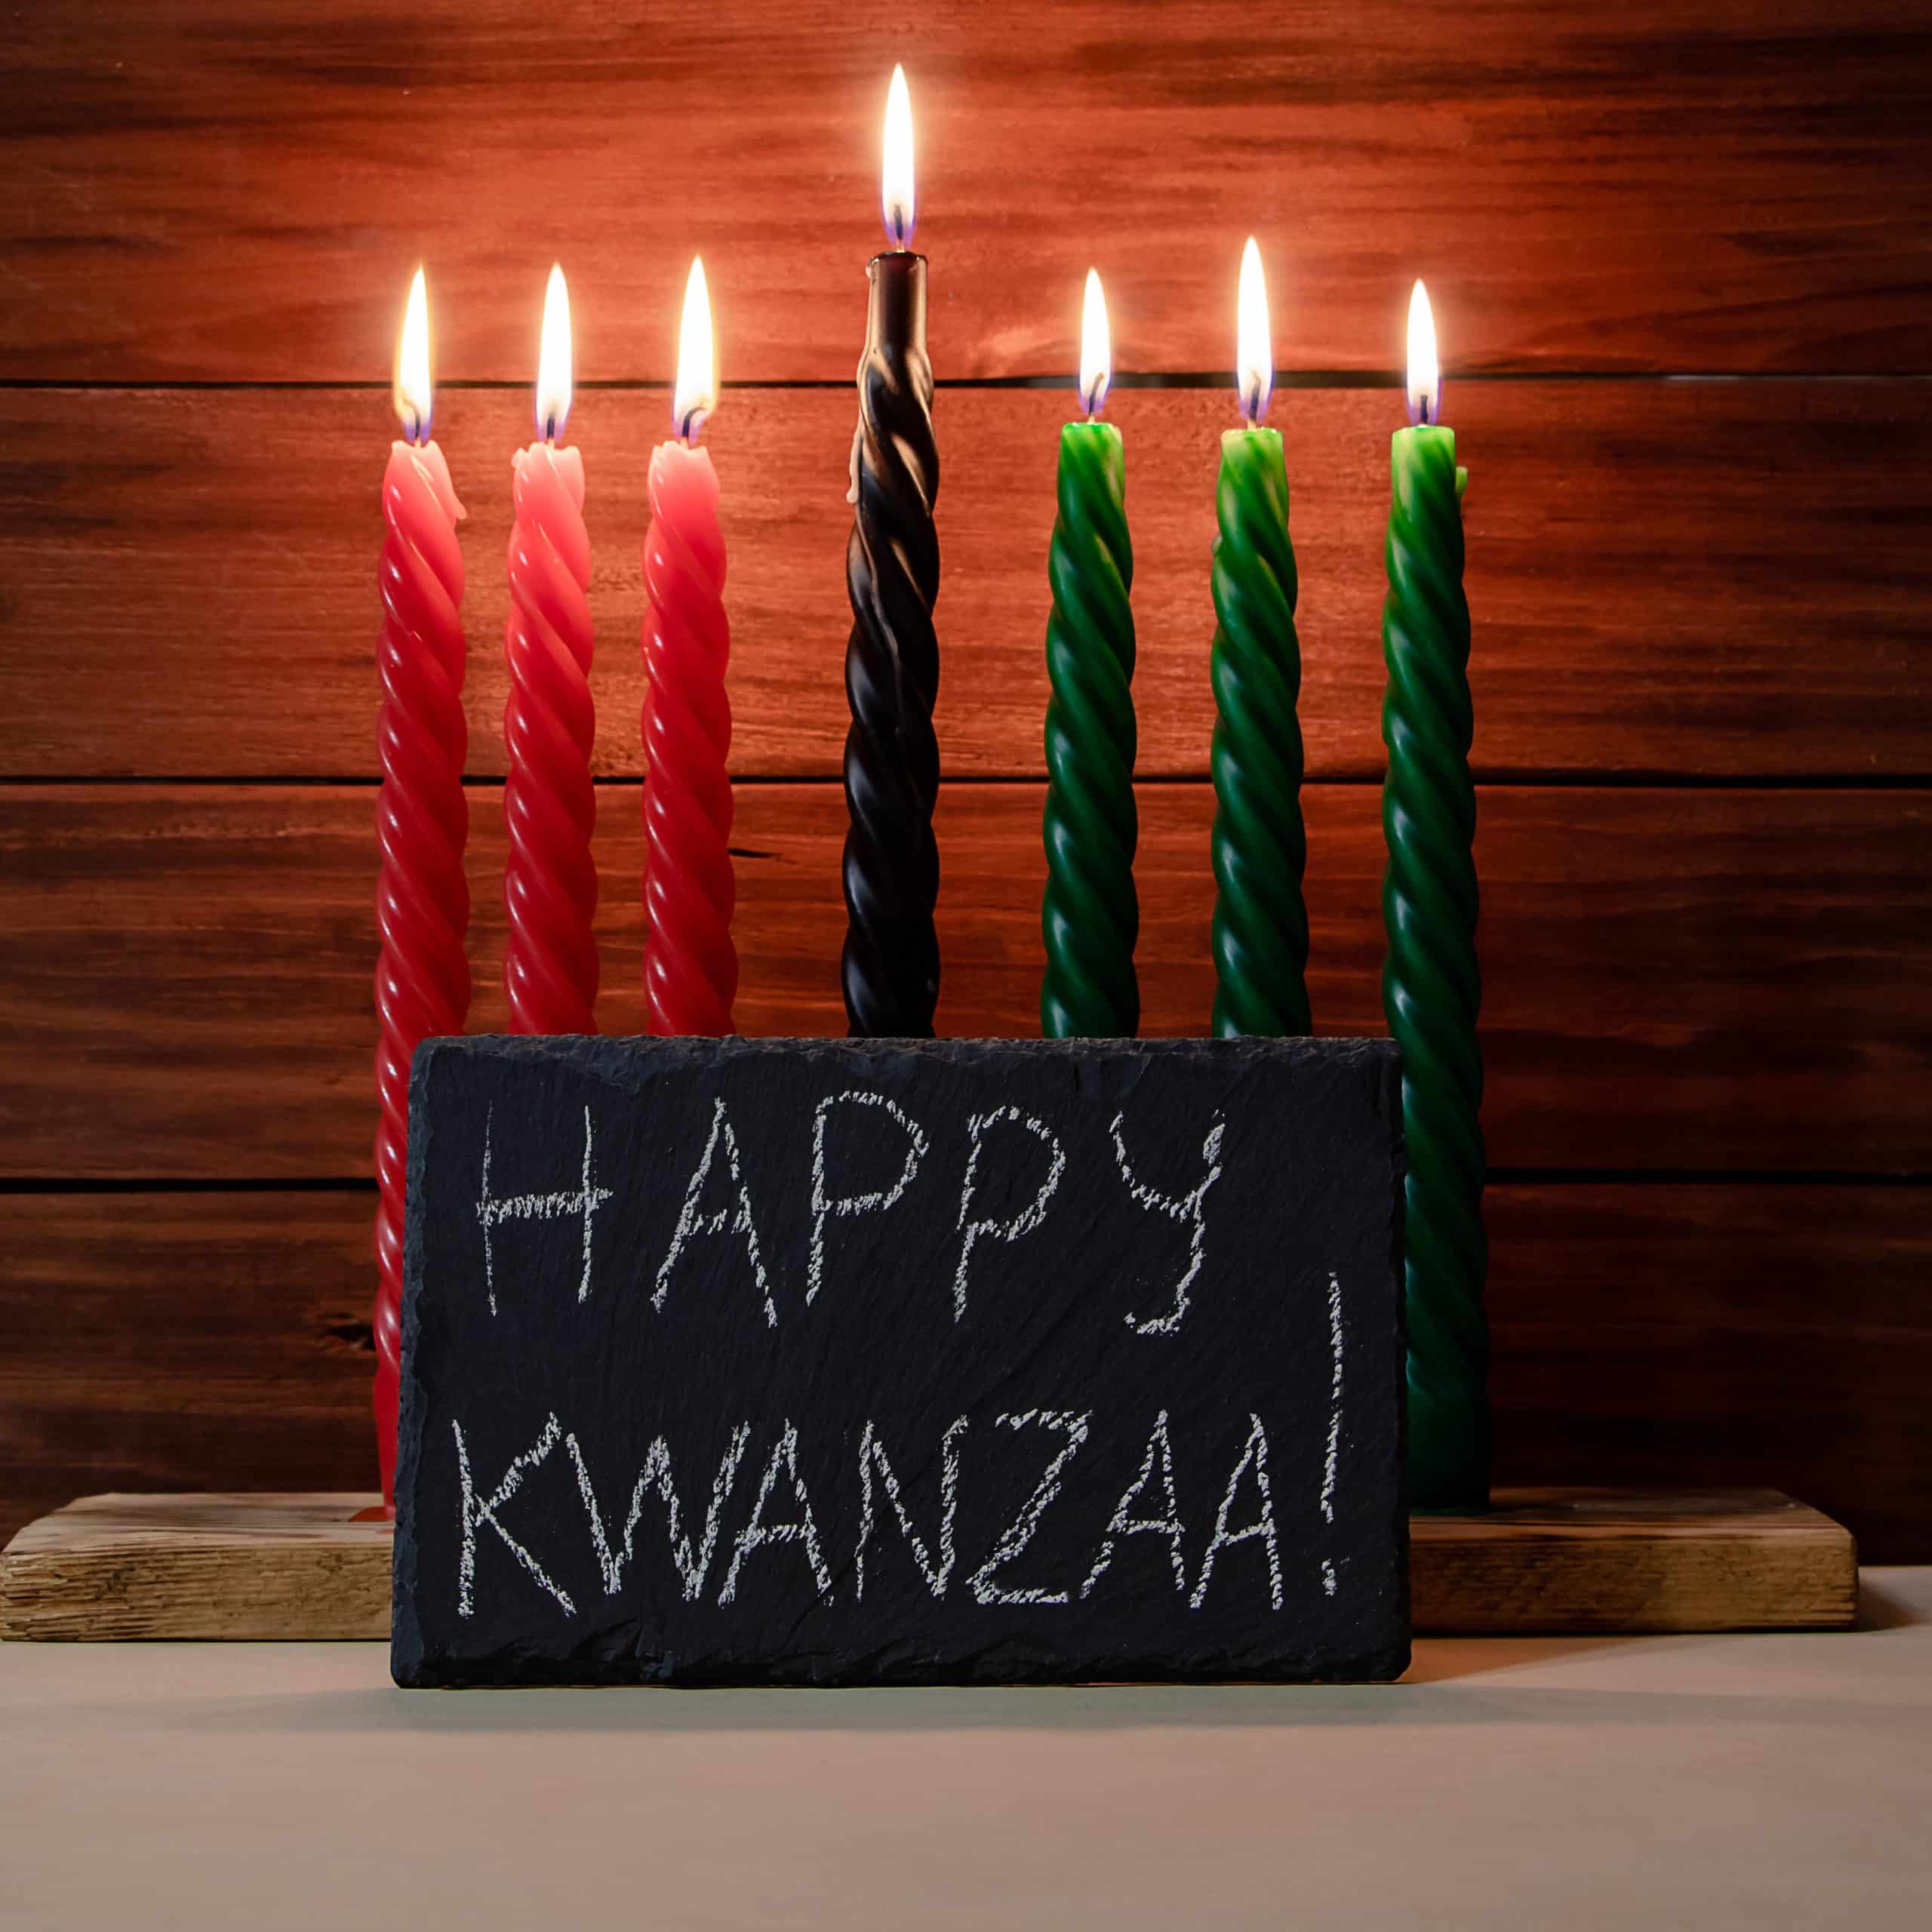 Happy Kwanzaa. African American holiday. Seven candles red, black and green on wooden background. Symbols of African heritage. Congratulatory inscription on chalk board.